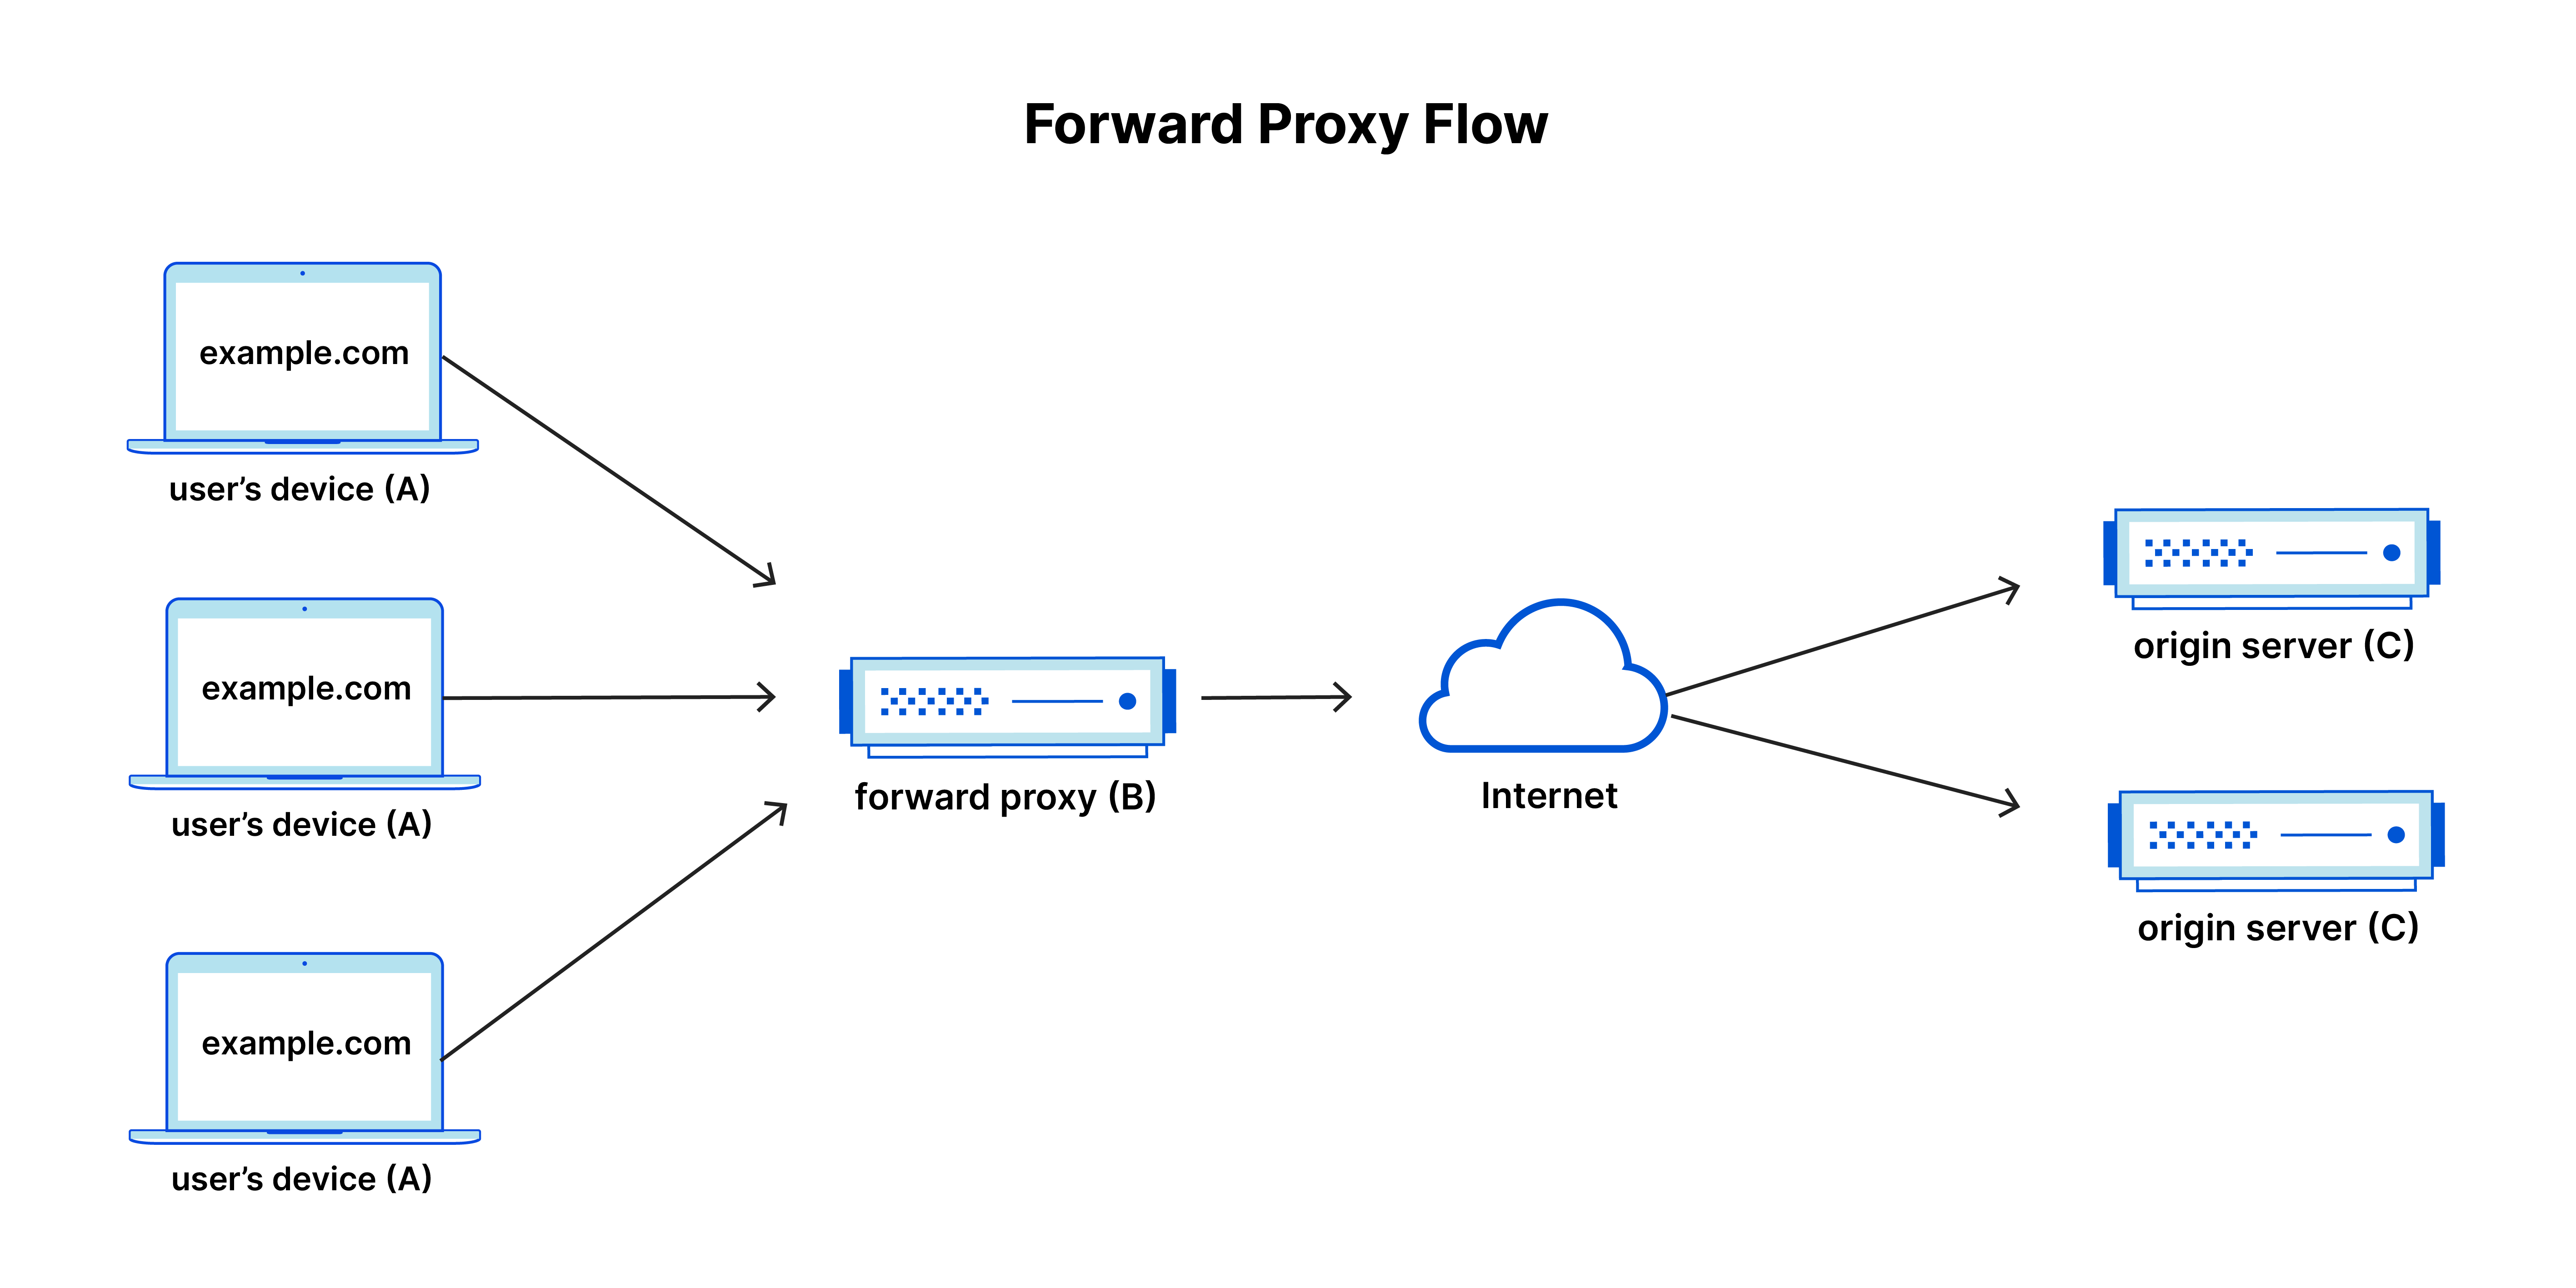 Forward proxy flow: traffic flows from user's device (A) to forward proxy (B) to Internet to origin server (C)